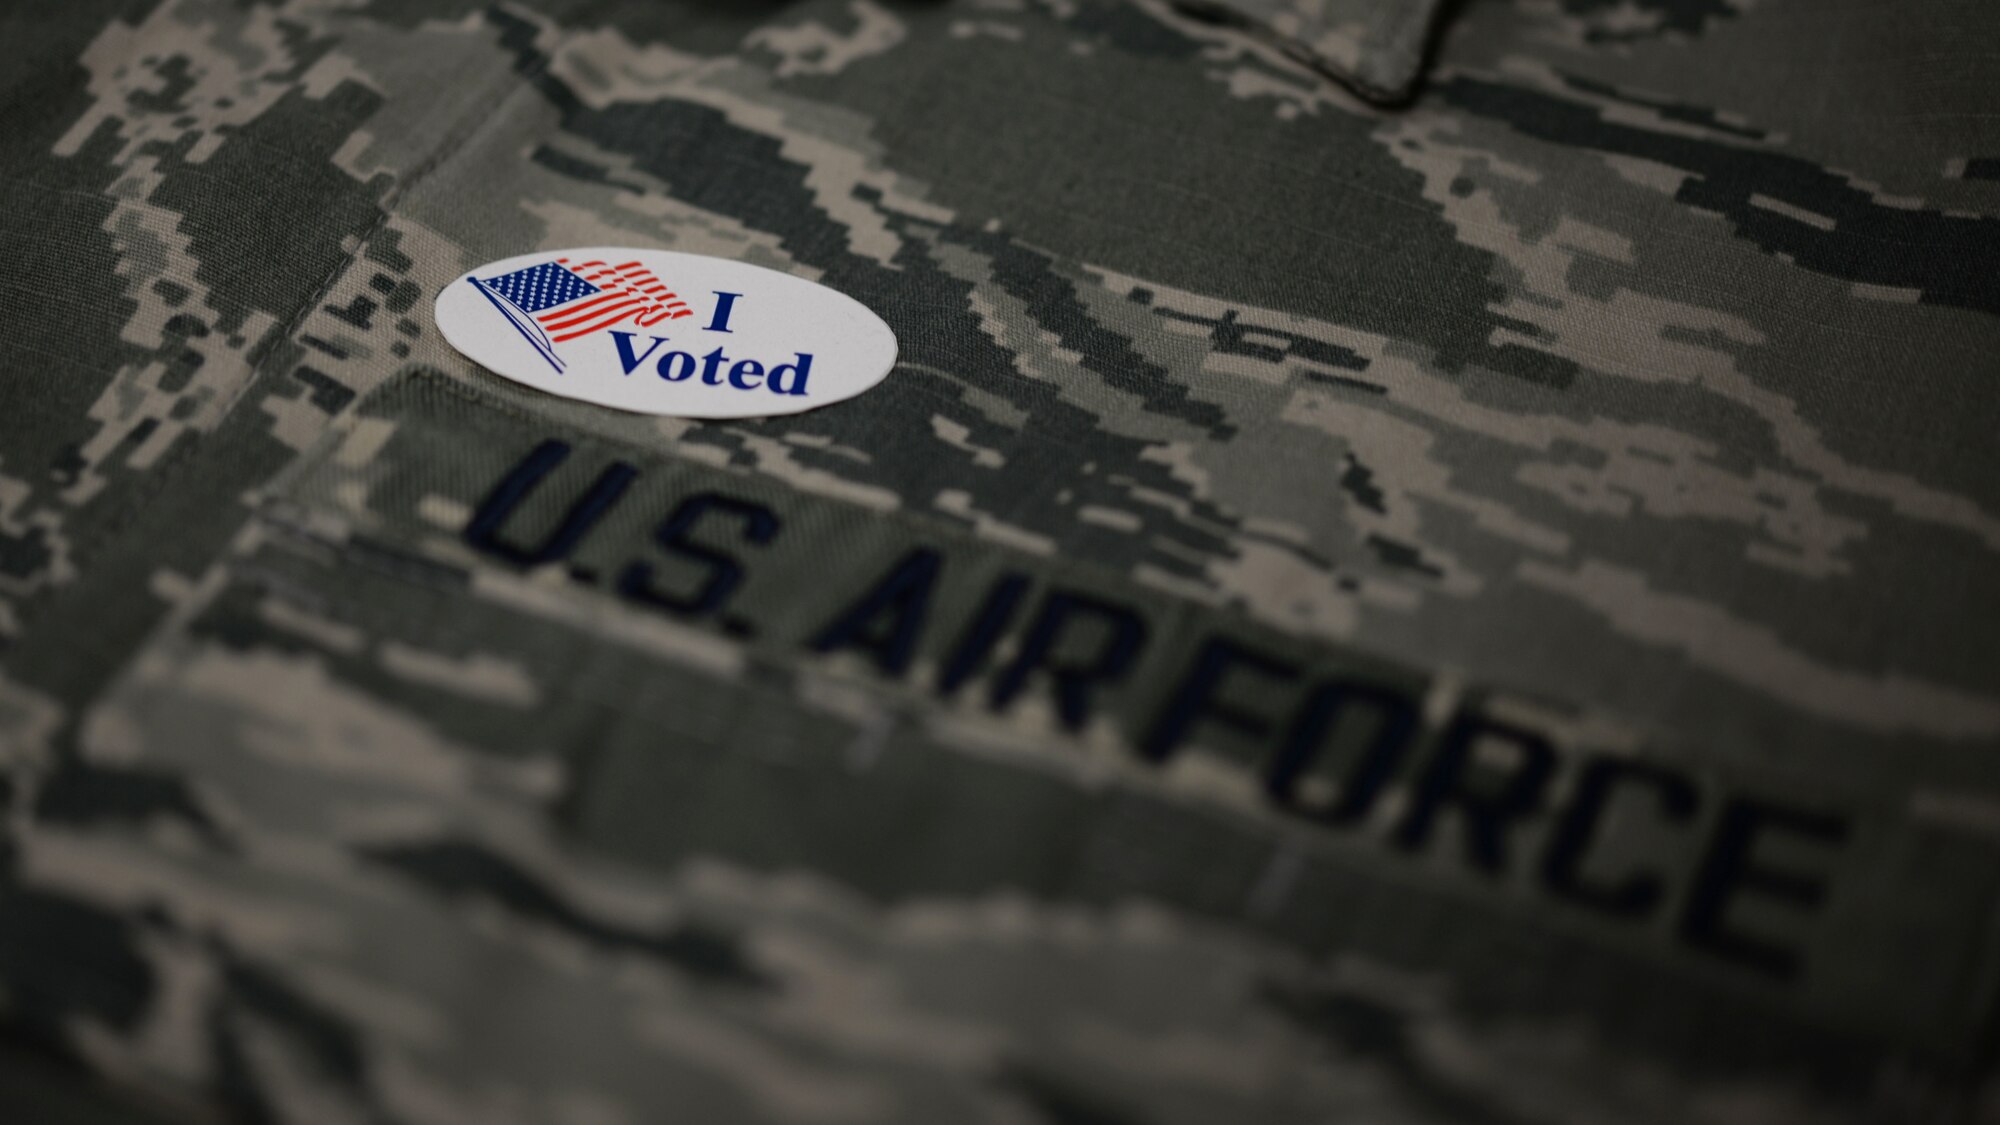 An "I voted" sticker is displayed on an U.S. Air Force uniform. Air Force members have the opportunity to vote regardless of location with the Federal Post Card Application. (Courtesy Photo)